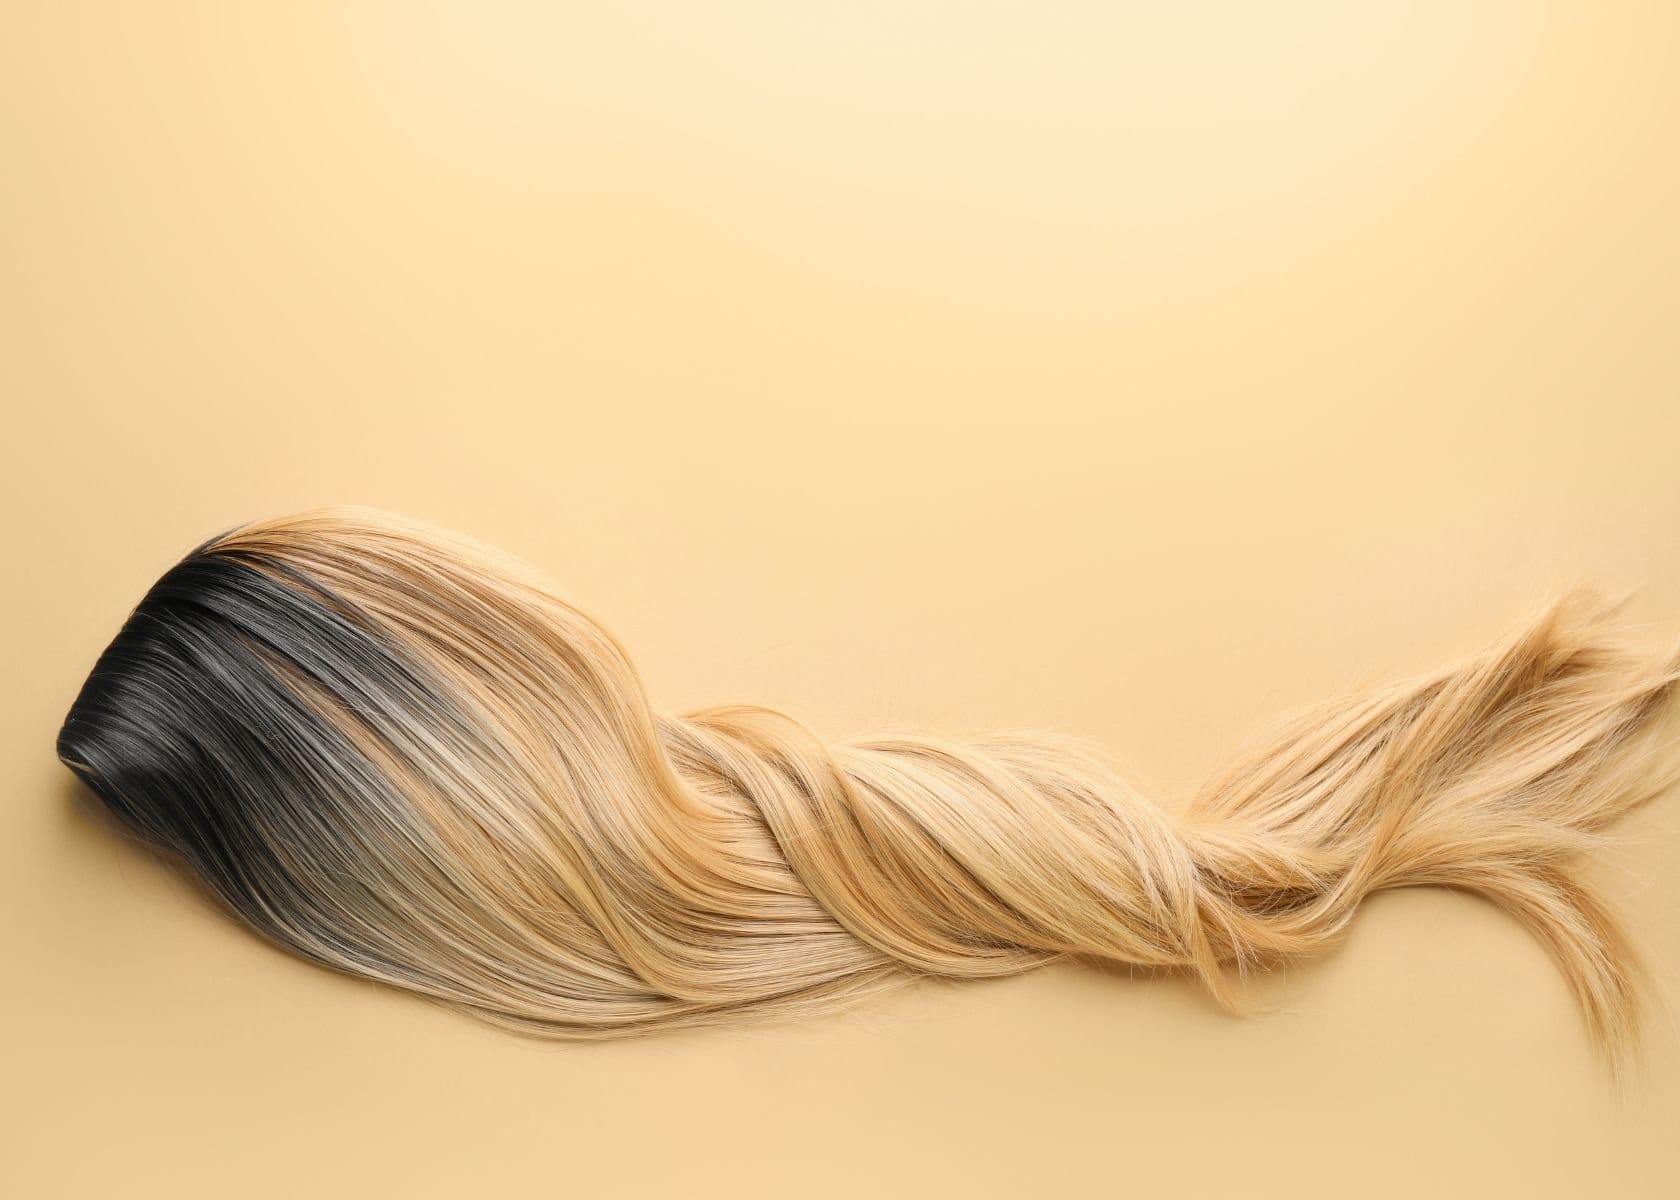 The Cost of Making a Wig from Your Own Hair